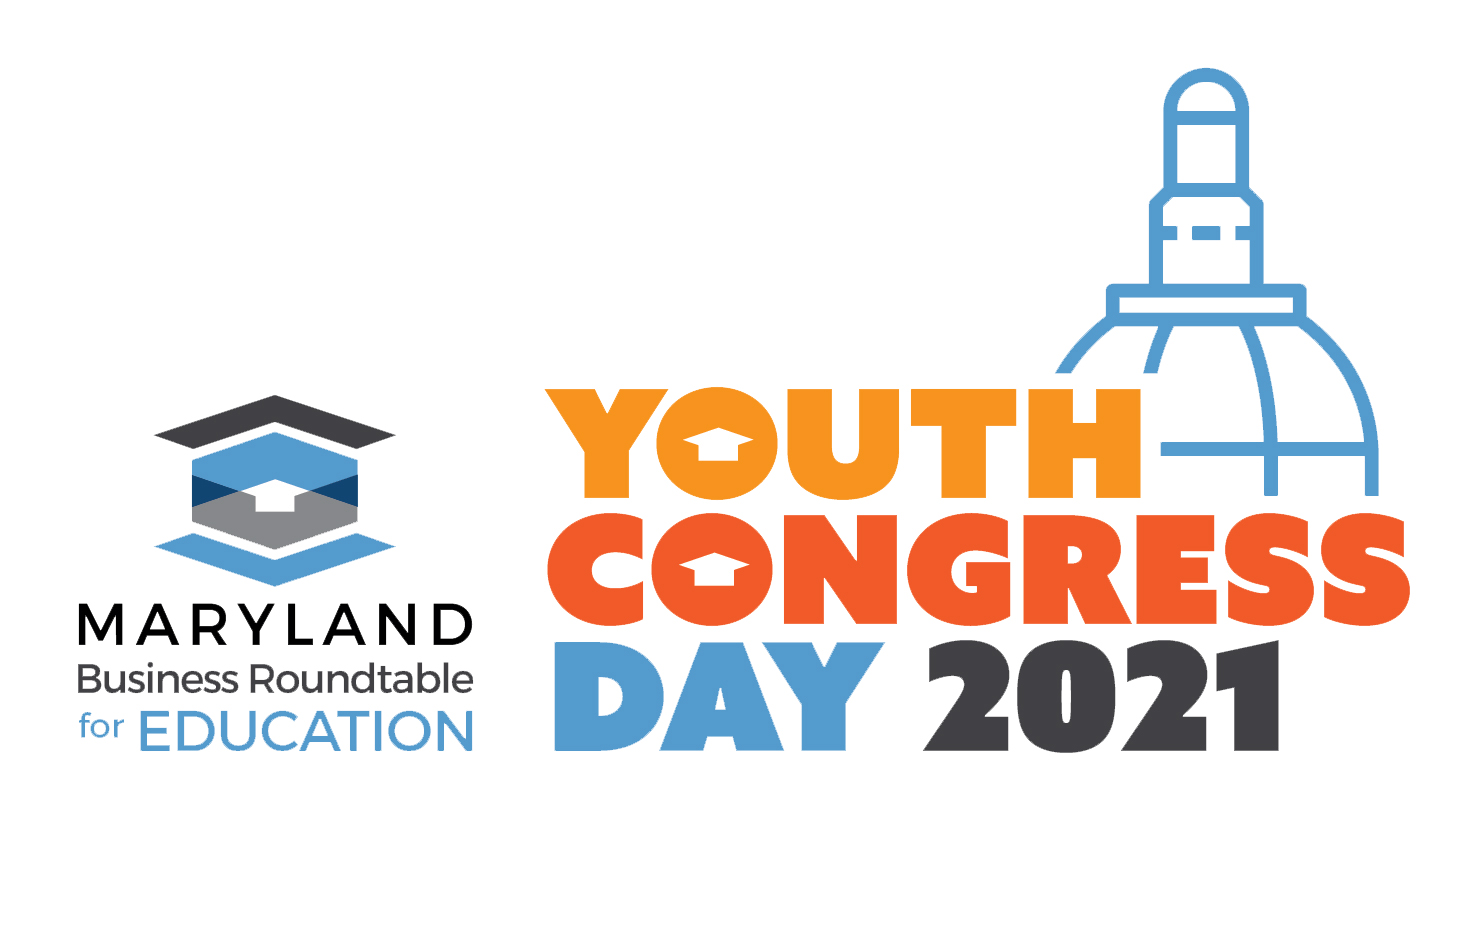 MBRT’s Second Annual Youth Congress Day Maryland Business Roundtable